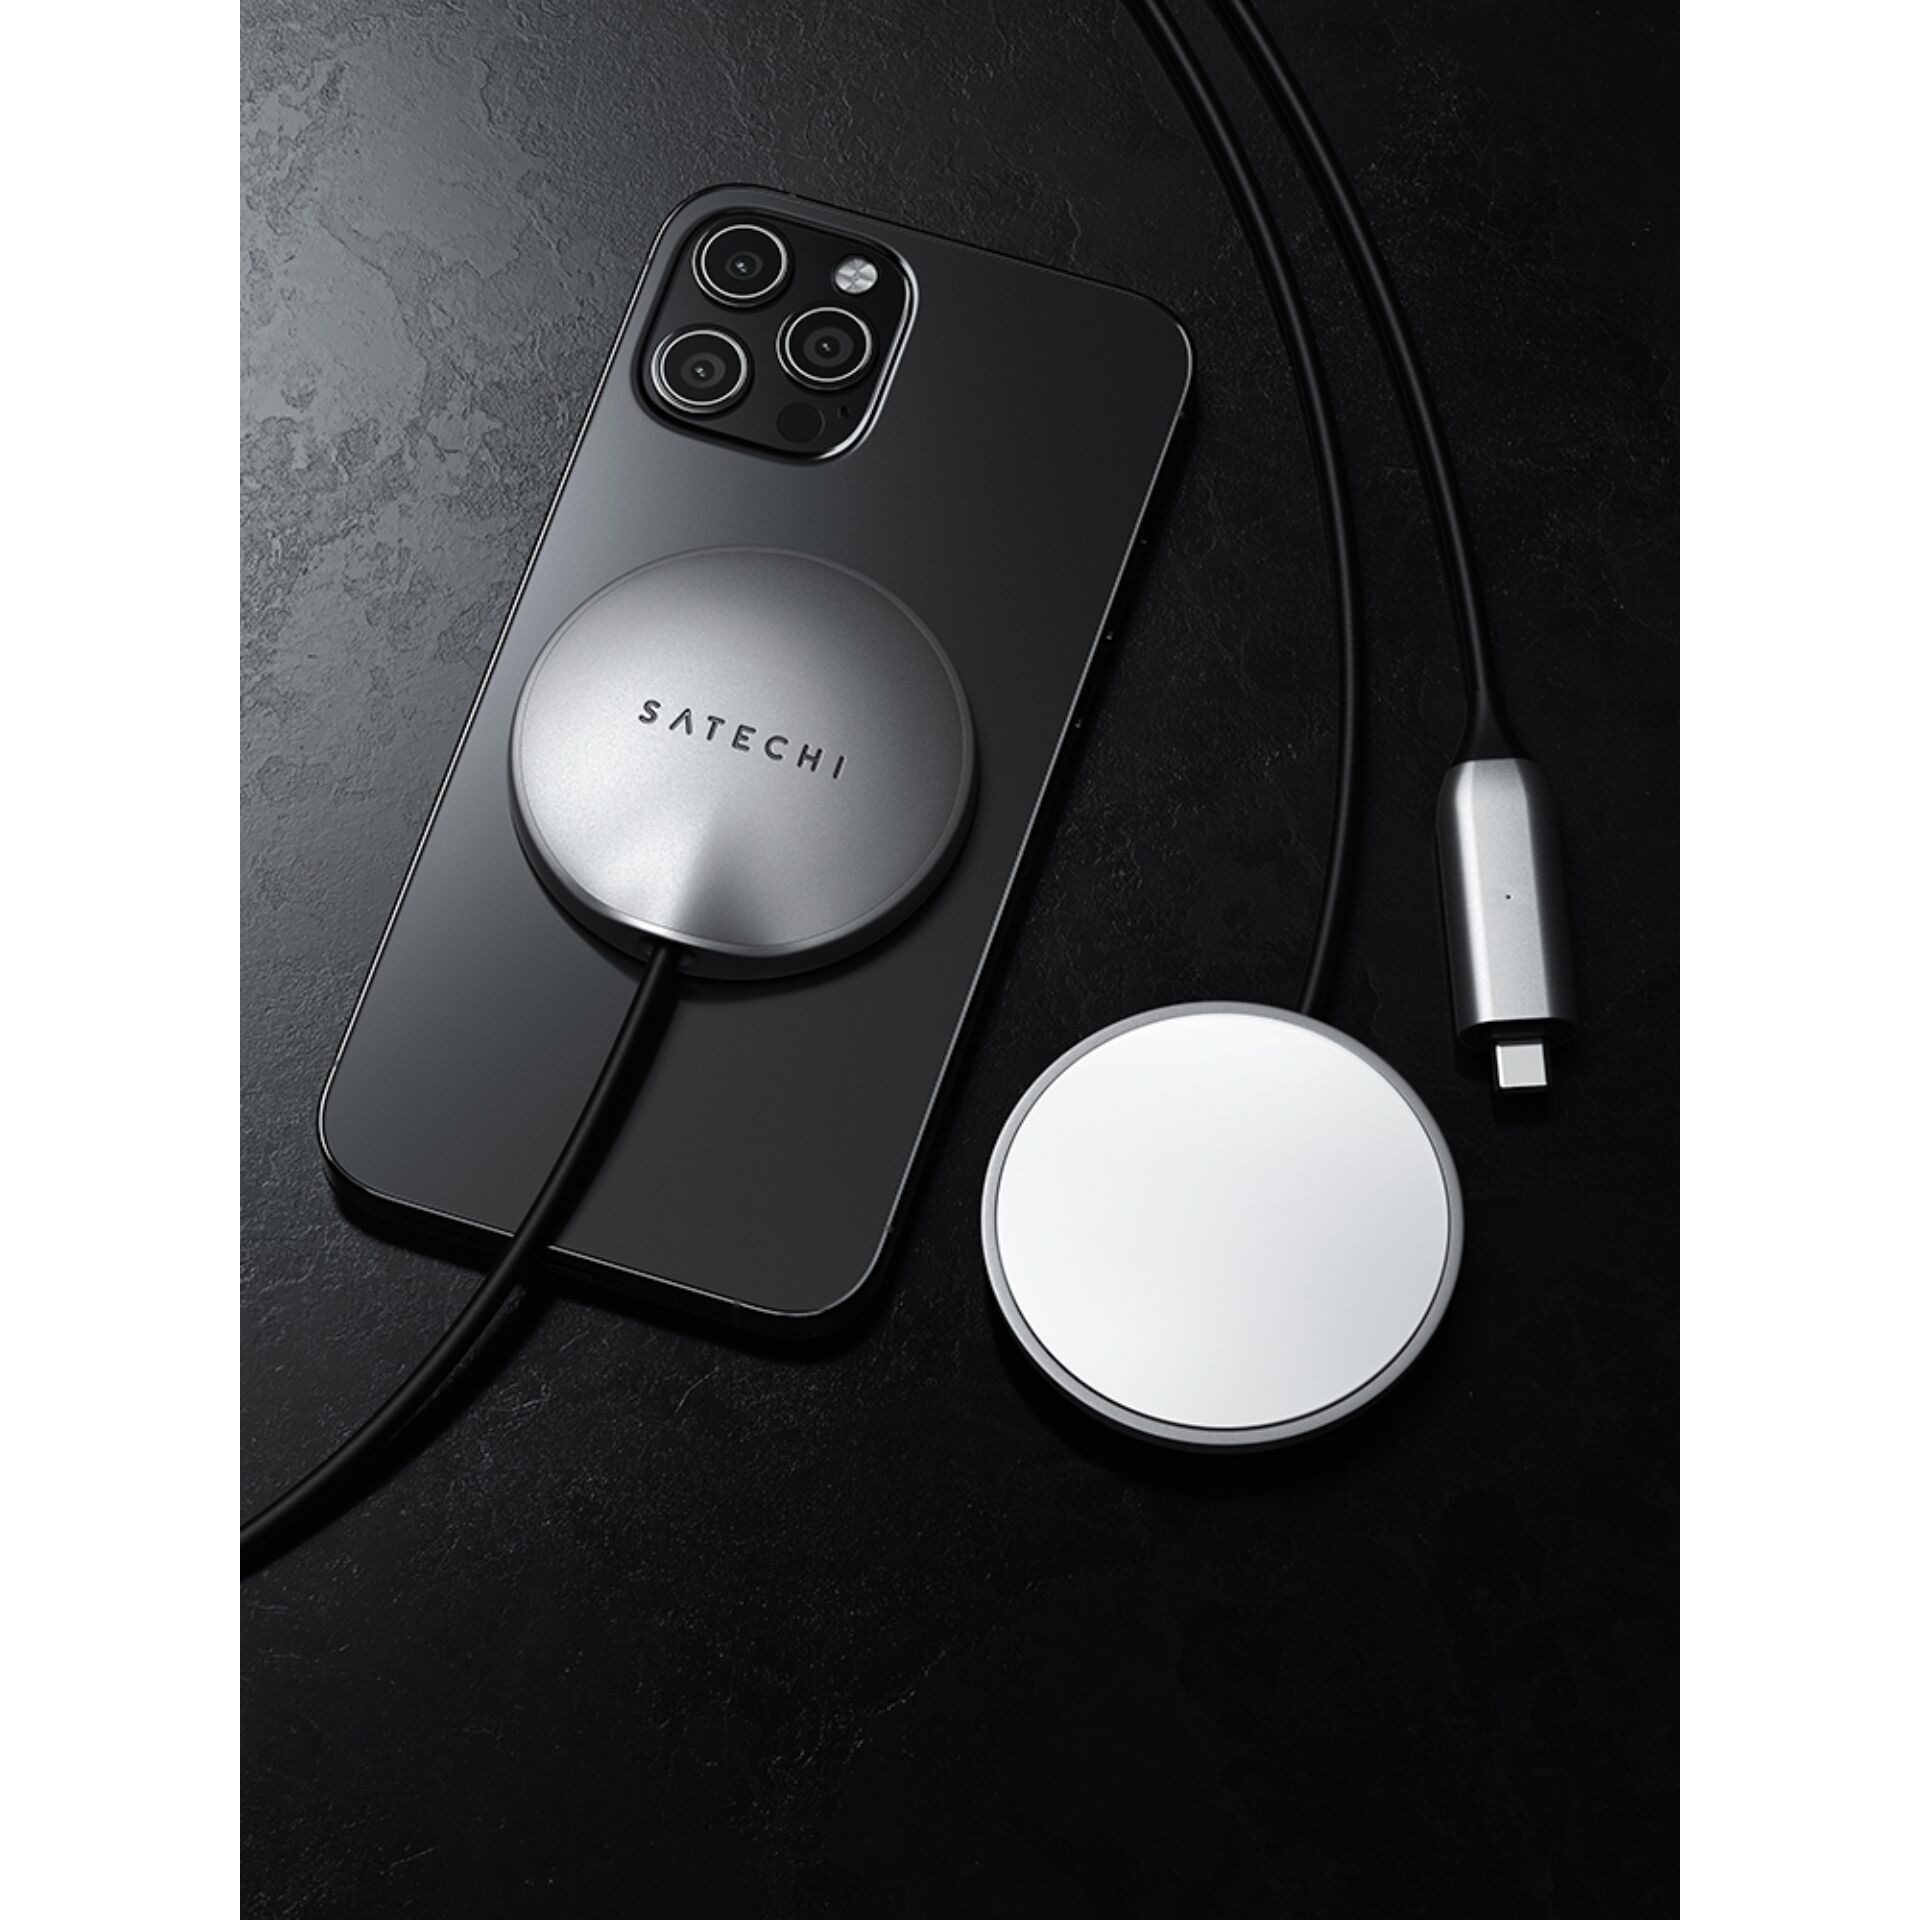 Satechi Magnetic Wireless Charging Cable - Space Gray (Grau)